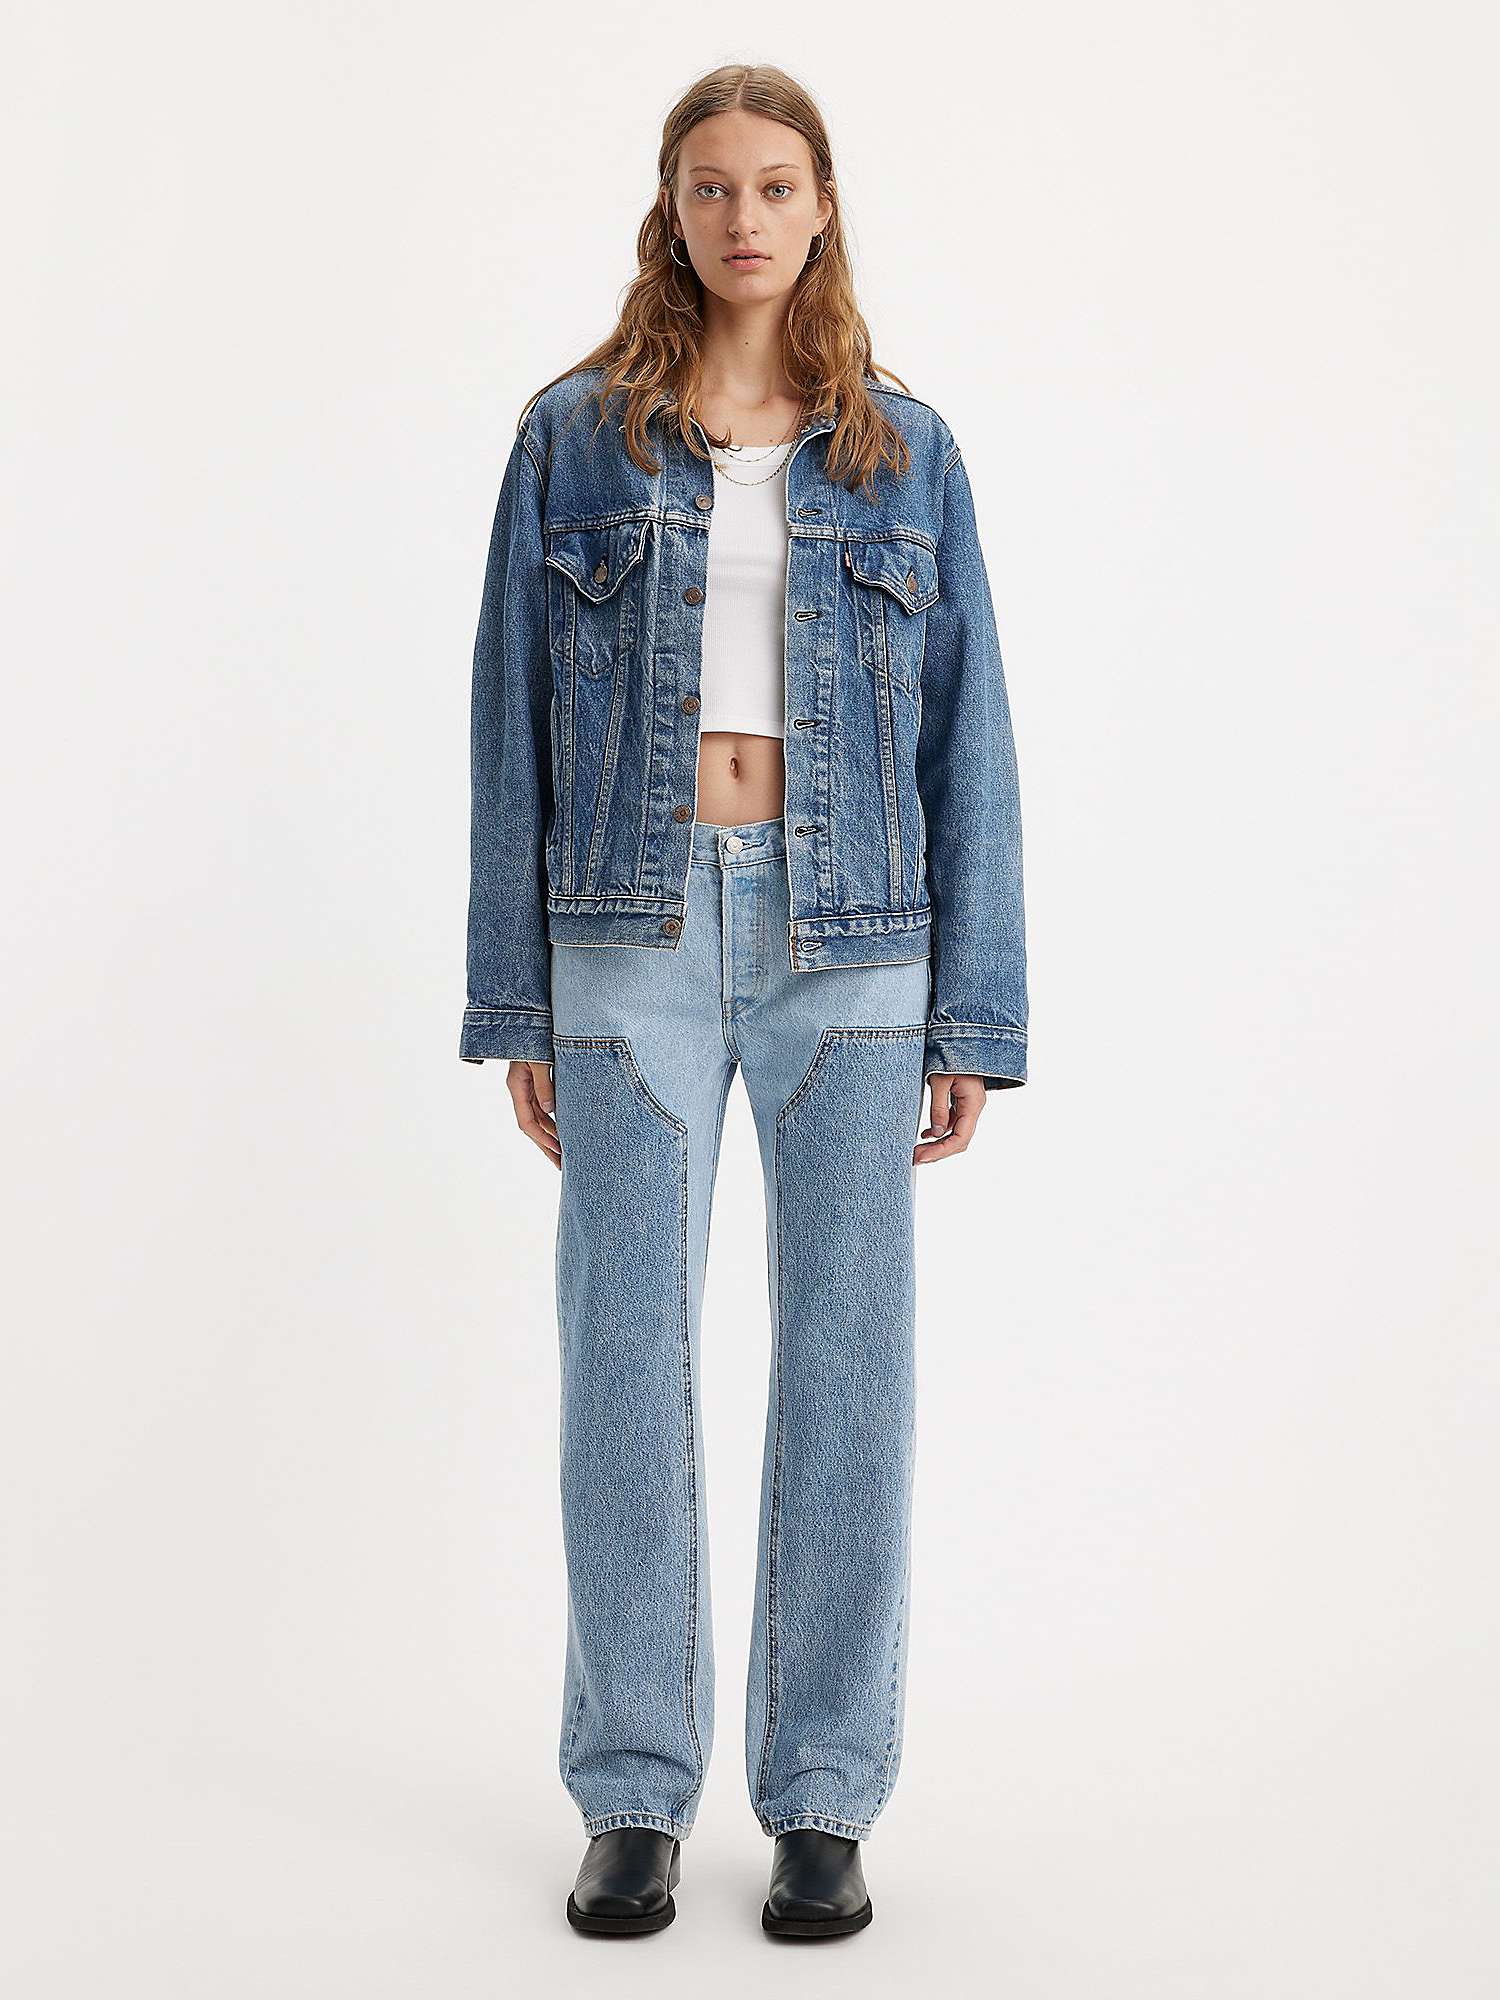 Buy Levi's 501 90's Chaps Jeans, Done And Dusted Online at johnlewis.com